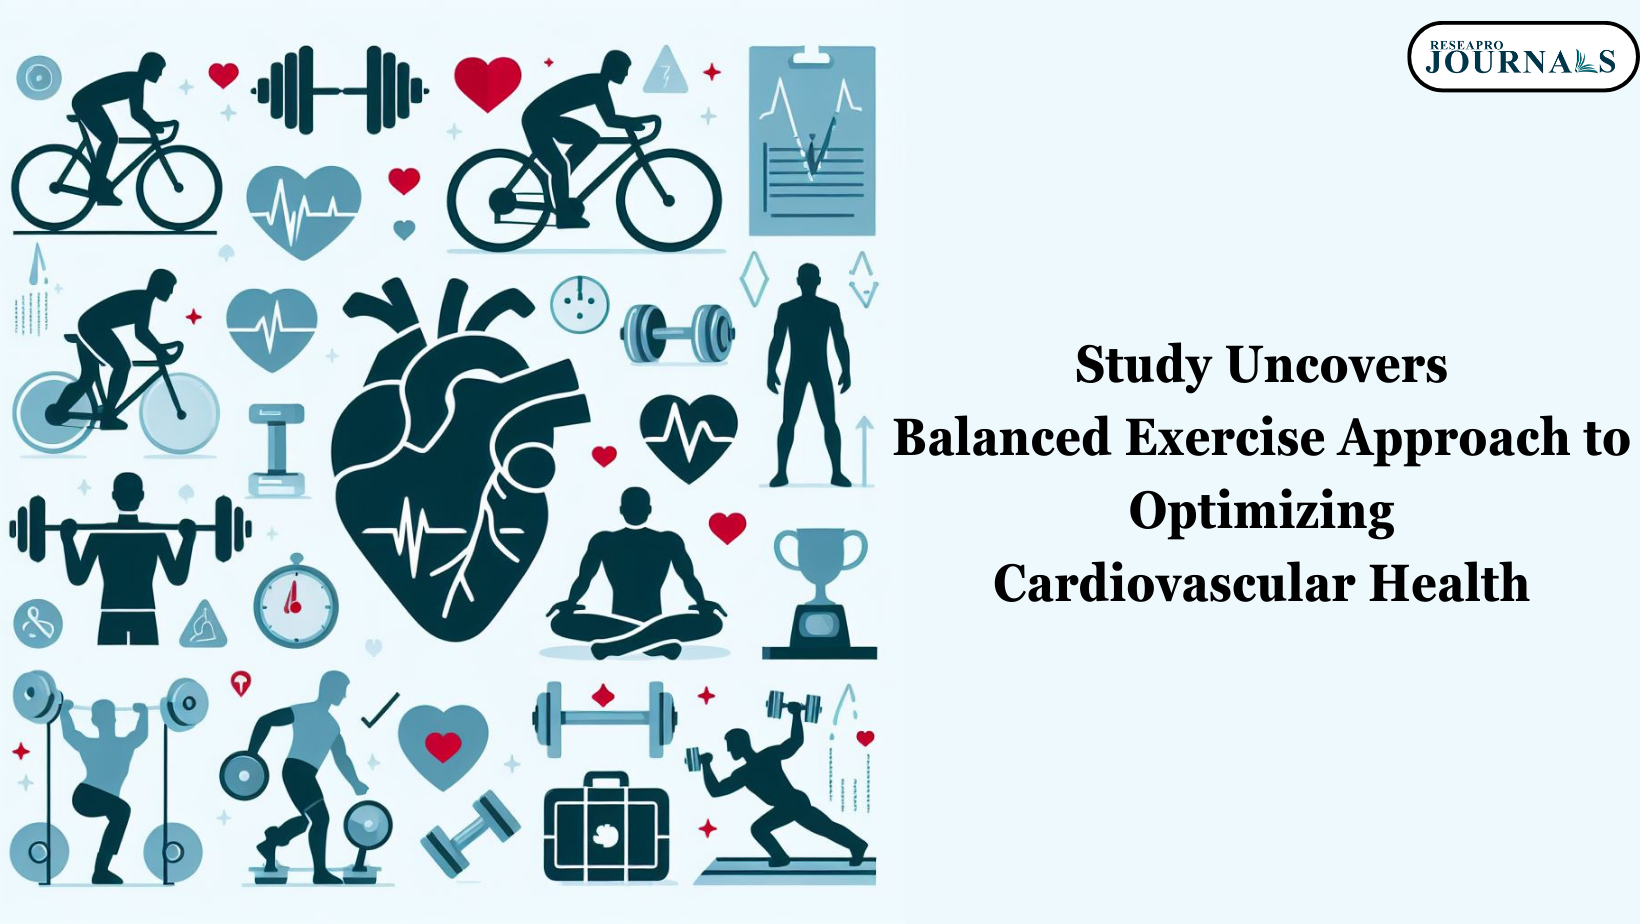 Recent Research Reveals Balanced Approach to Cardiovascular Health